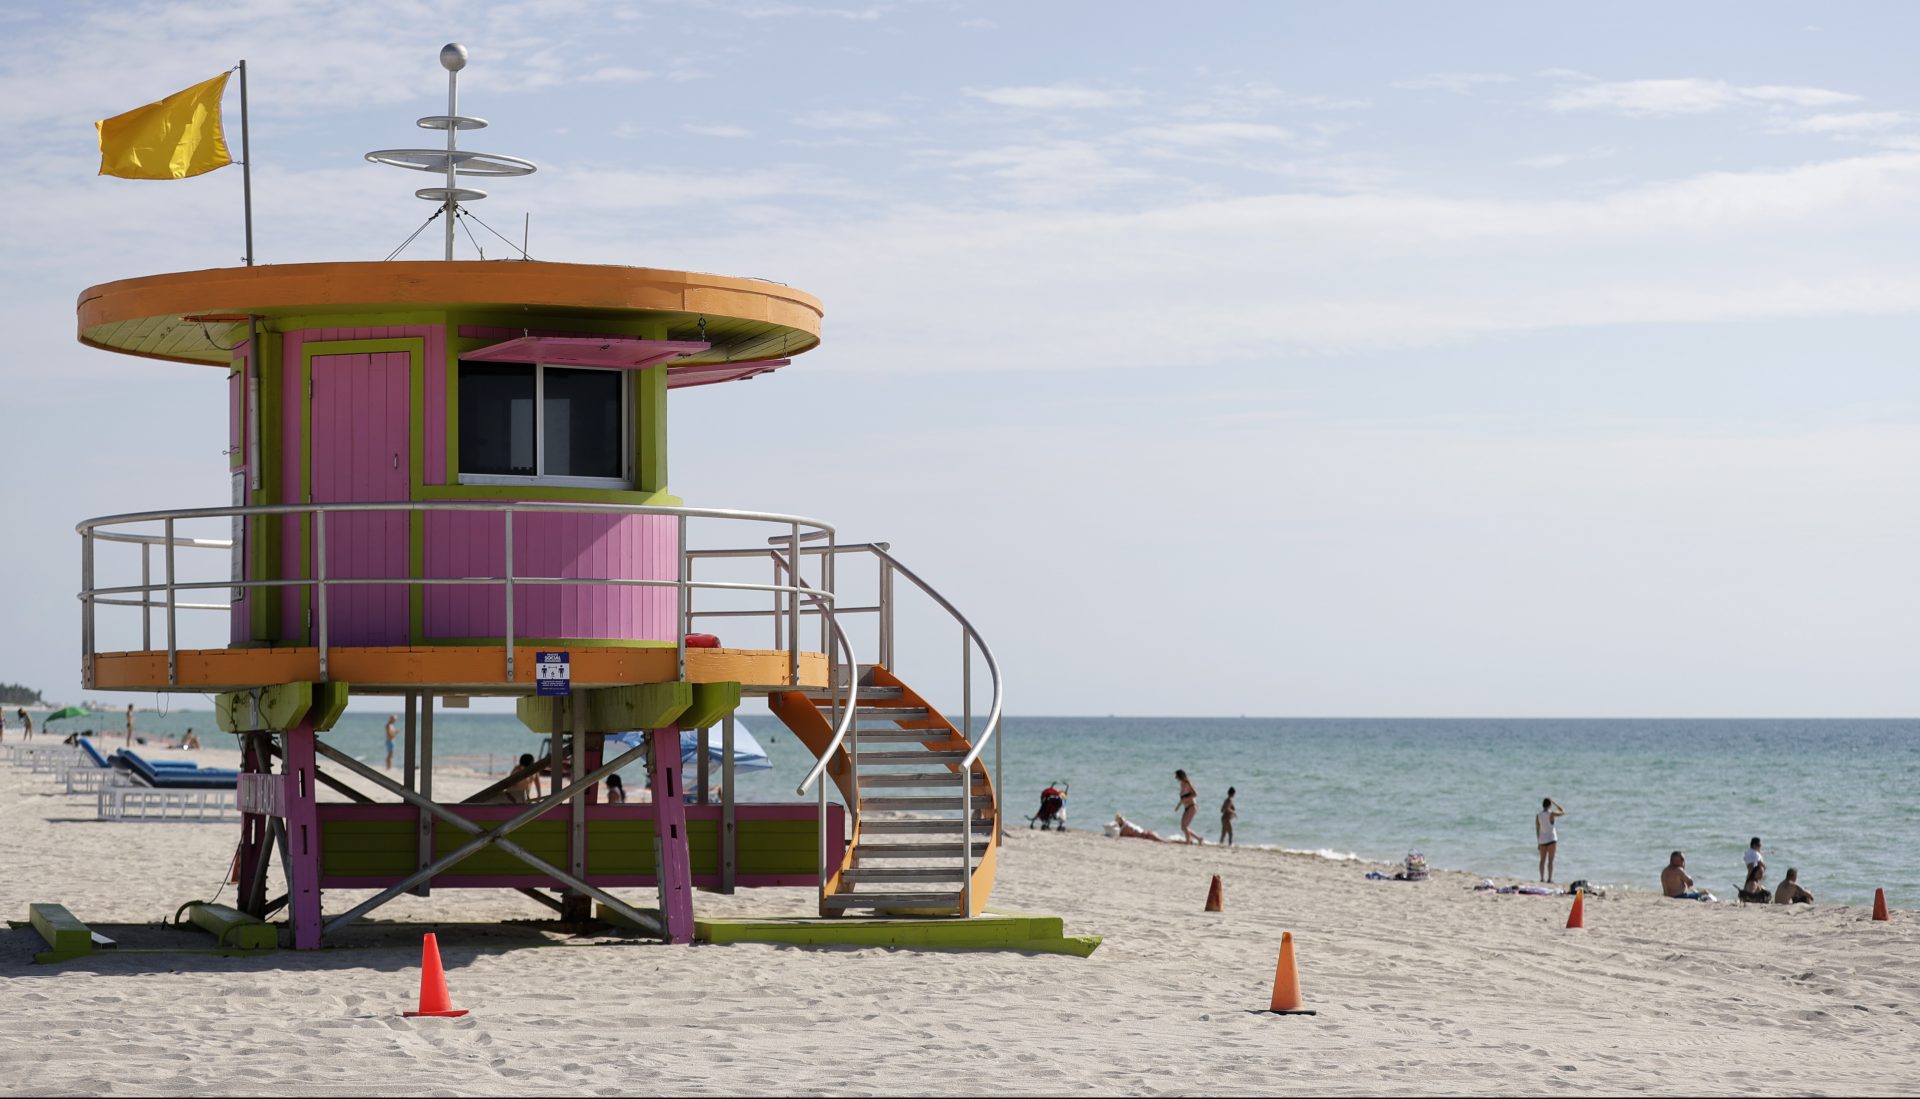 Beachgoers enjoy a day on the sand near a lifeguard stand, Wednesday, June 10, 2020, on Miami Beach, Florida's famed South Beach. Beaches in Miami-Dade County opened with restrictions Wednesday after having been closed for 12 weeks due to the COVID-19 outbreak.